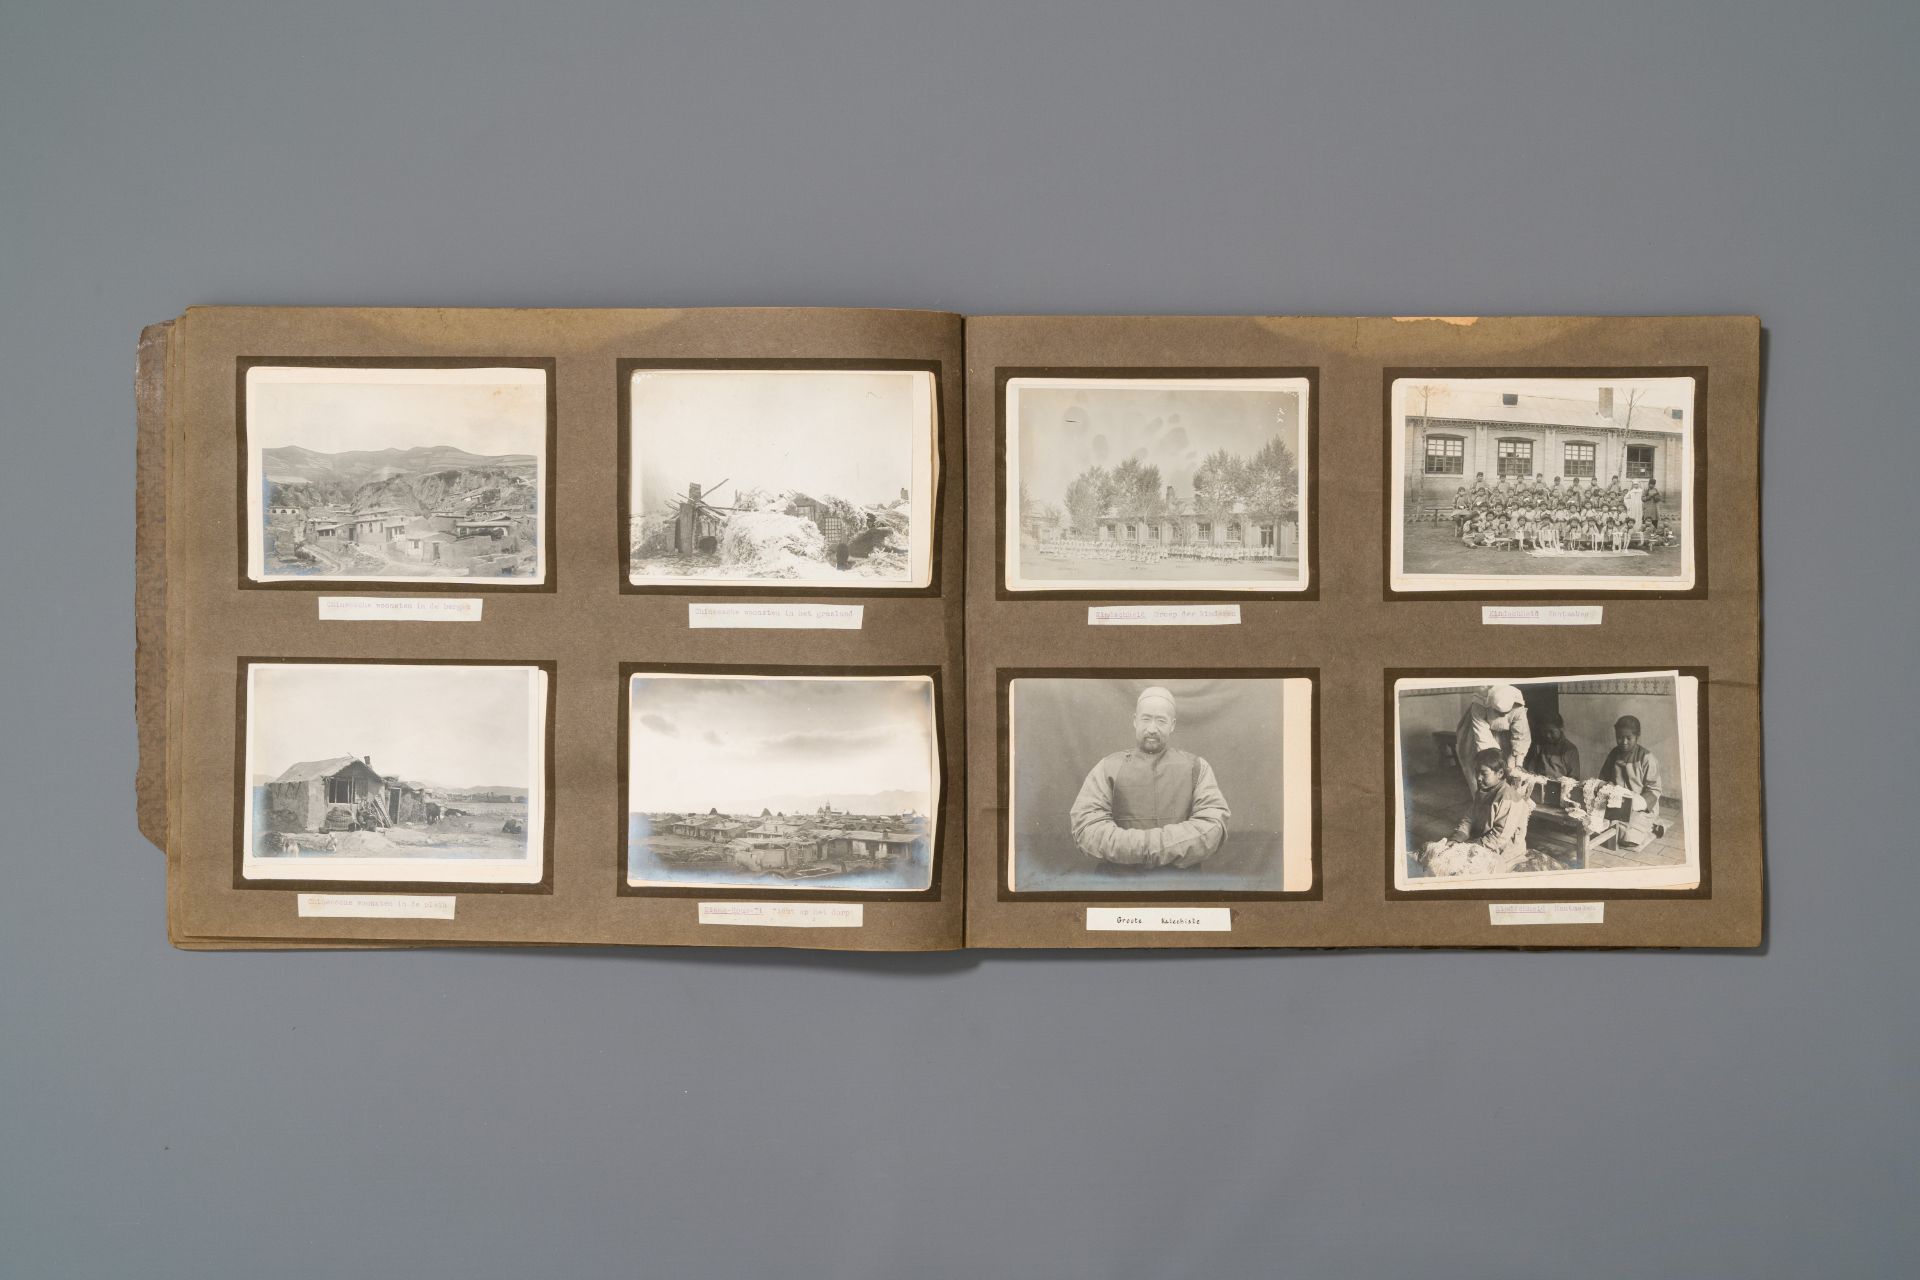 A photo album from a Belgian Catholic mission in Inner Mongolia in China, ca. 1924 - Image 6 of 10